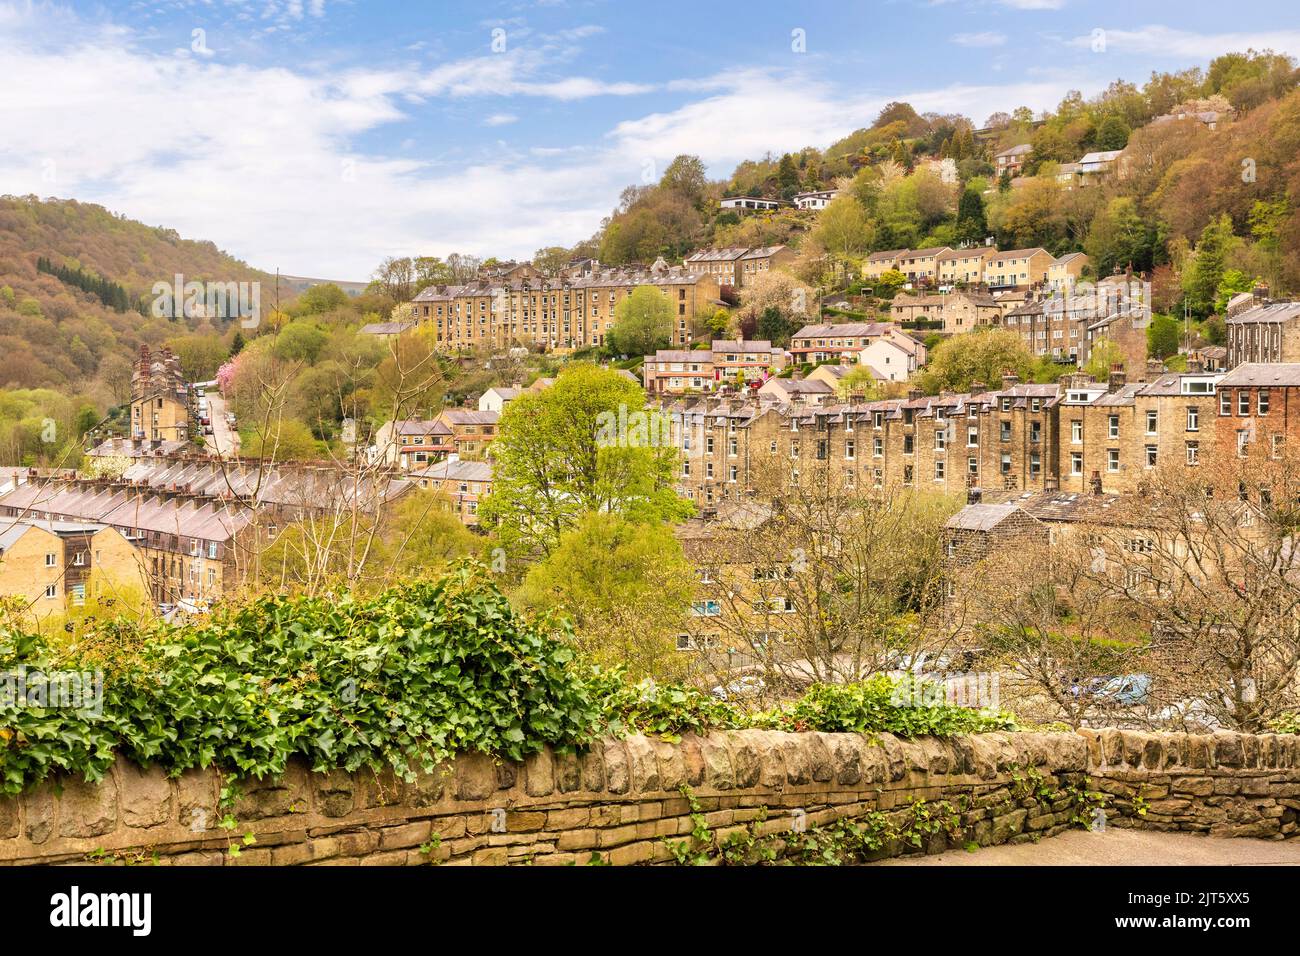 Hebden Bridge, West Yorkshire, UK - A view over the terraced houses of the beautiful Yorkshire mill town of Hebden Bridge, from a high viewpoint. Stock Photo